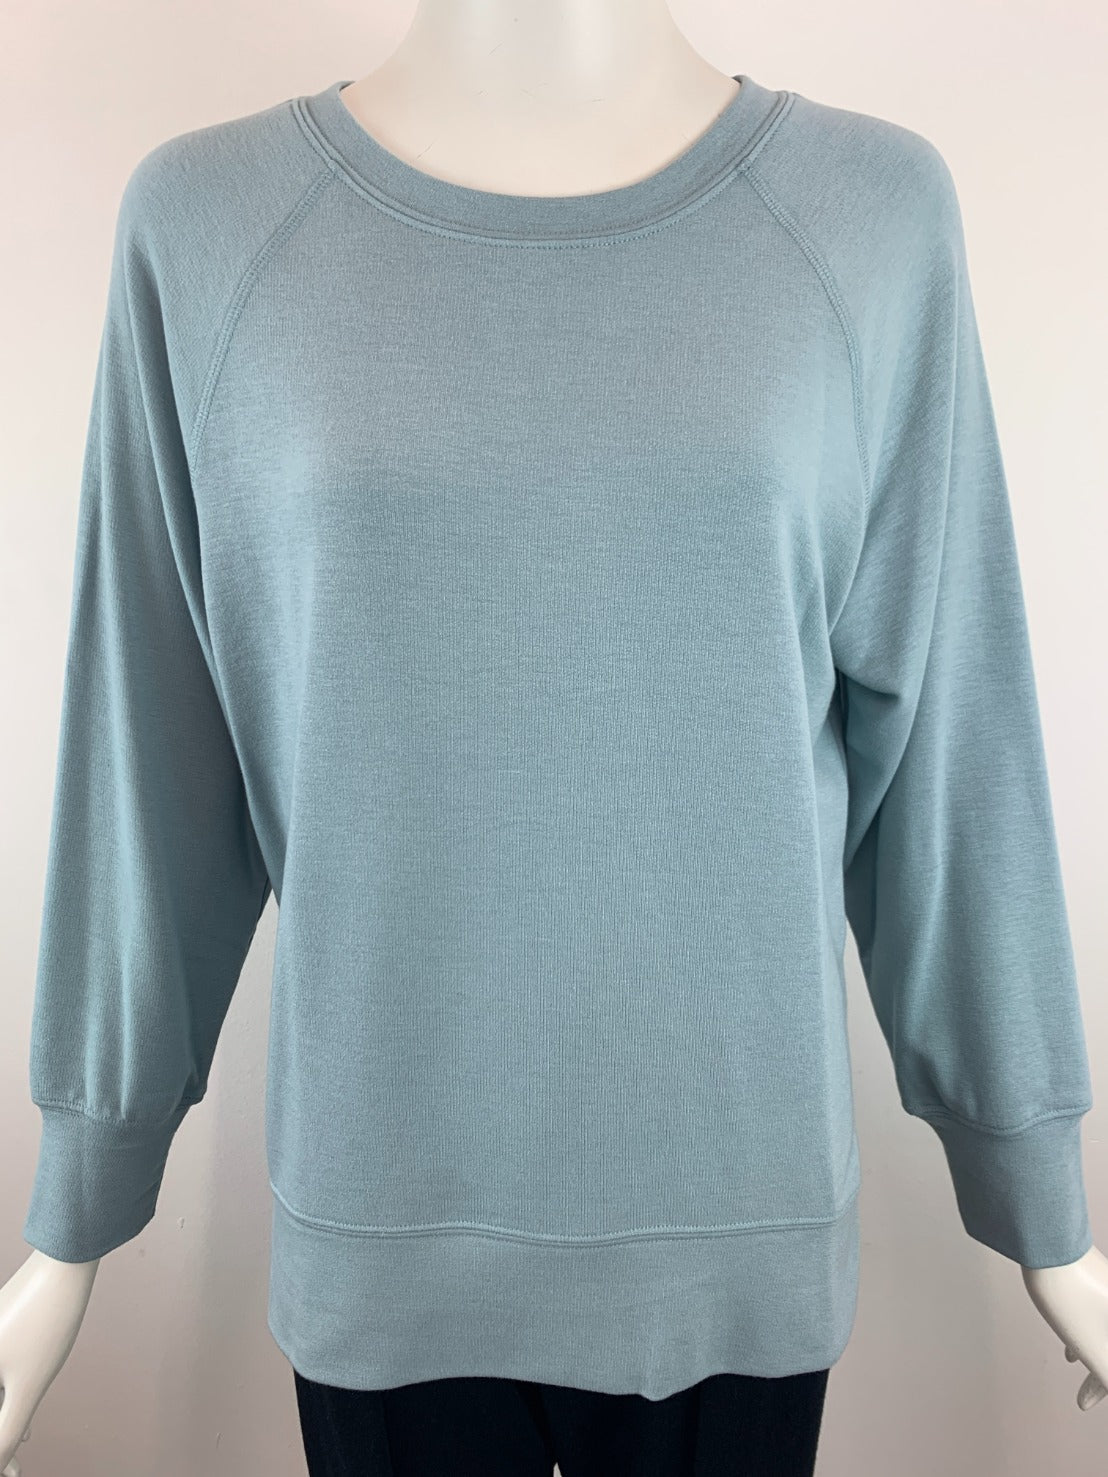 Nally & Millie French Terry Sweatshirt - Silver Blue available at The Good Life Boutique